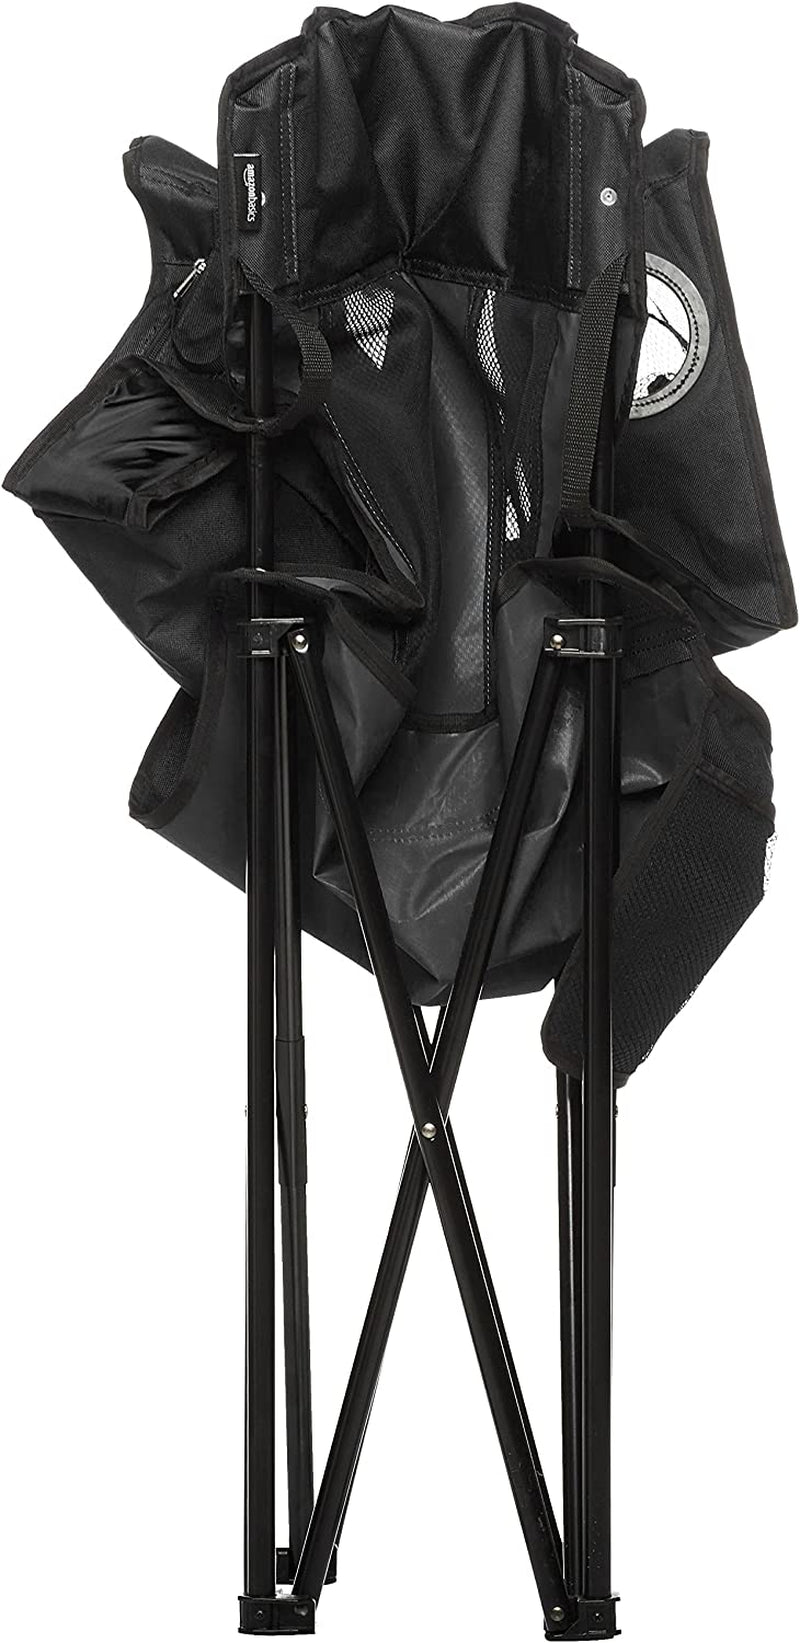 Portable Folding Camping Chair with Carrying Bag Home & Garden > Lighting > Lighting Fixtures > Chandeliers KOL DEALS   